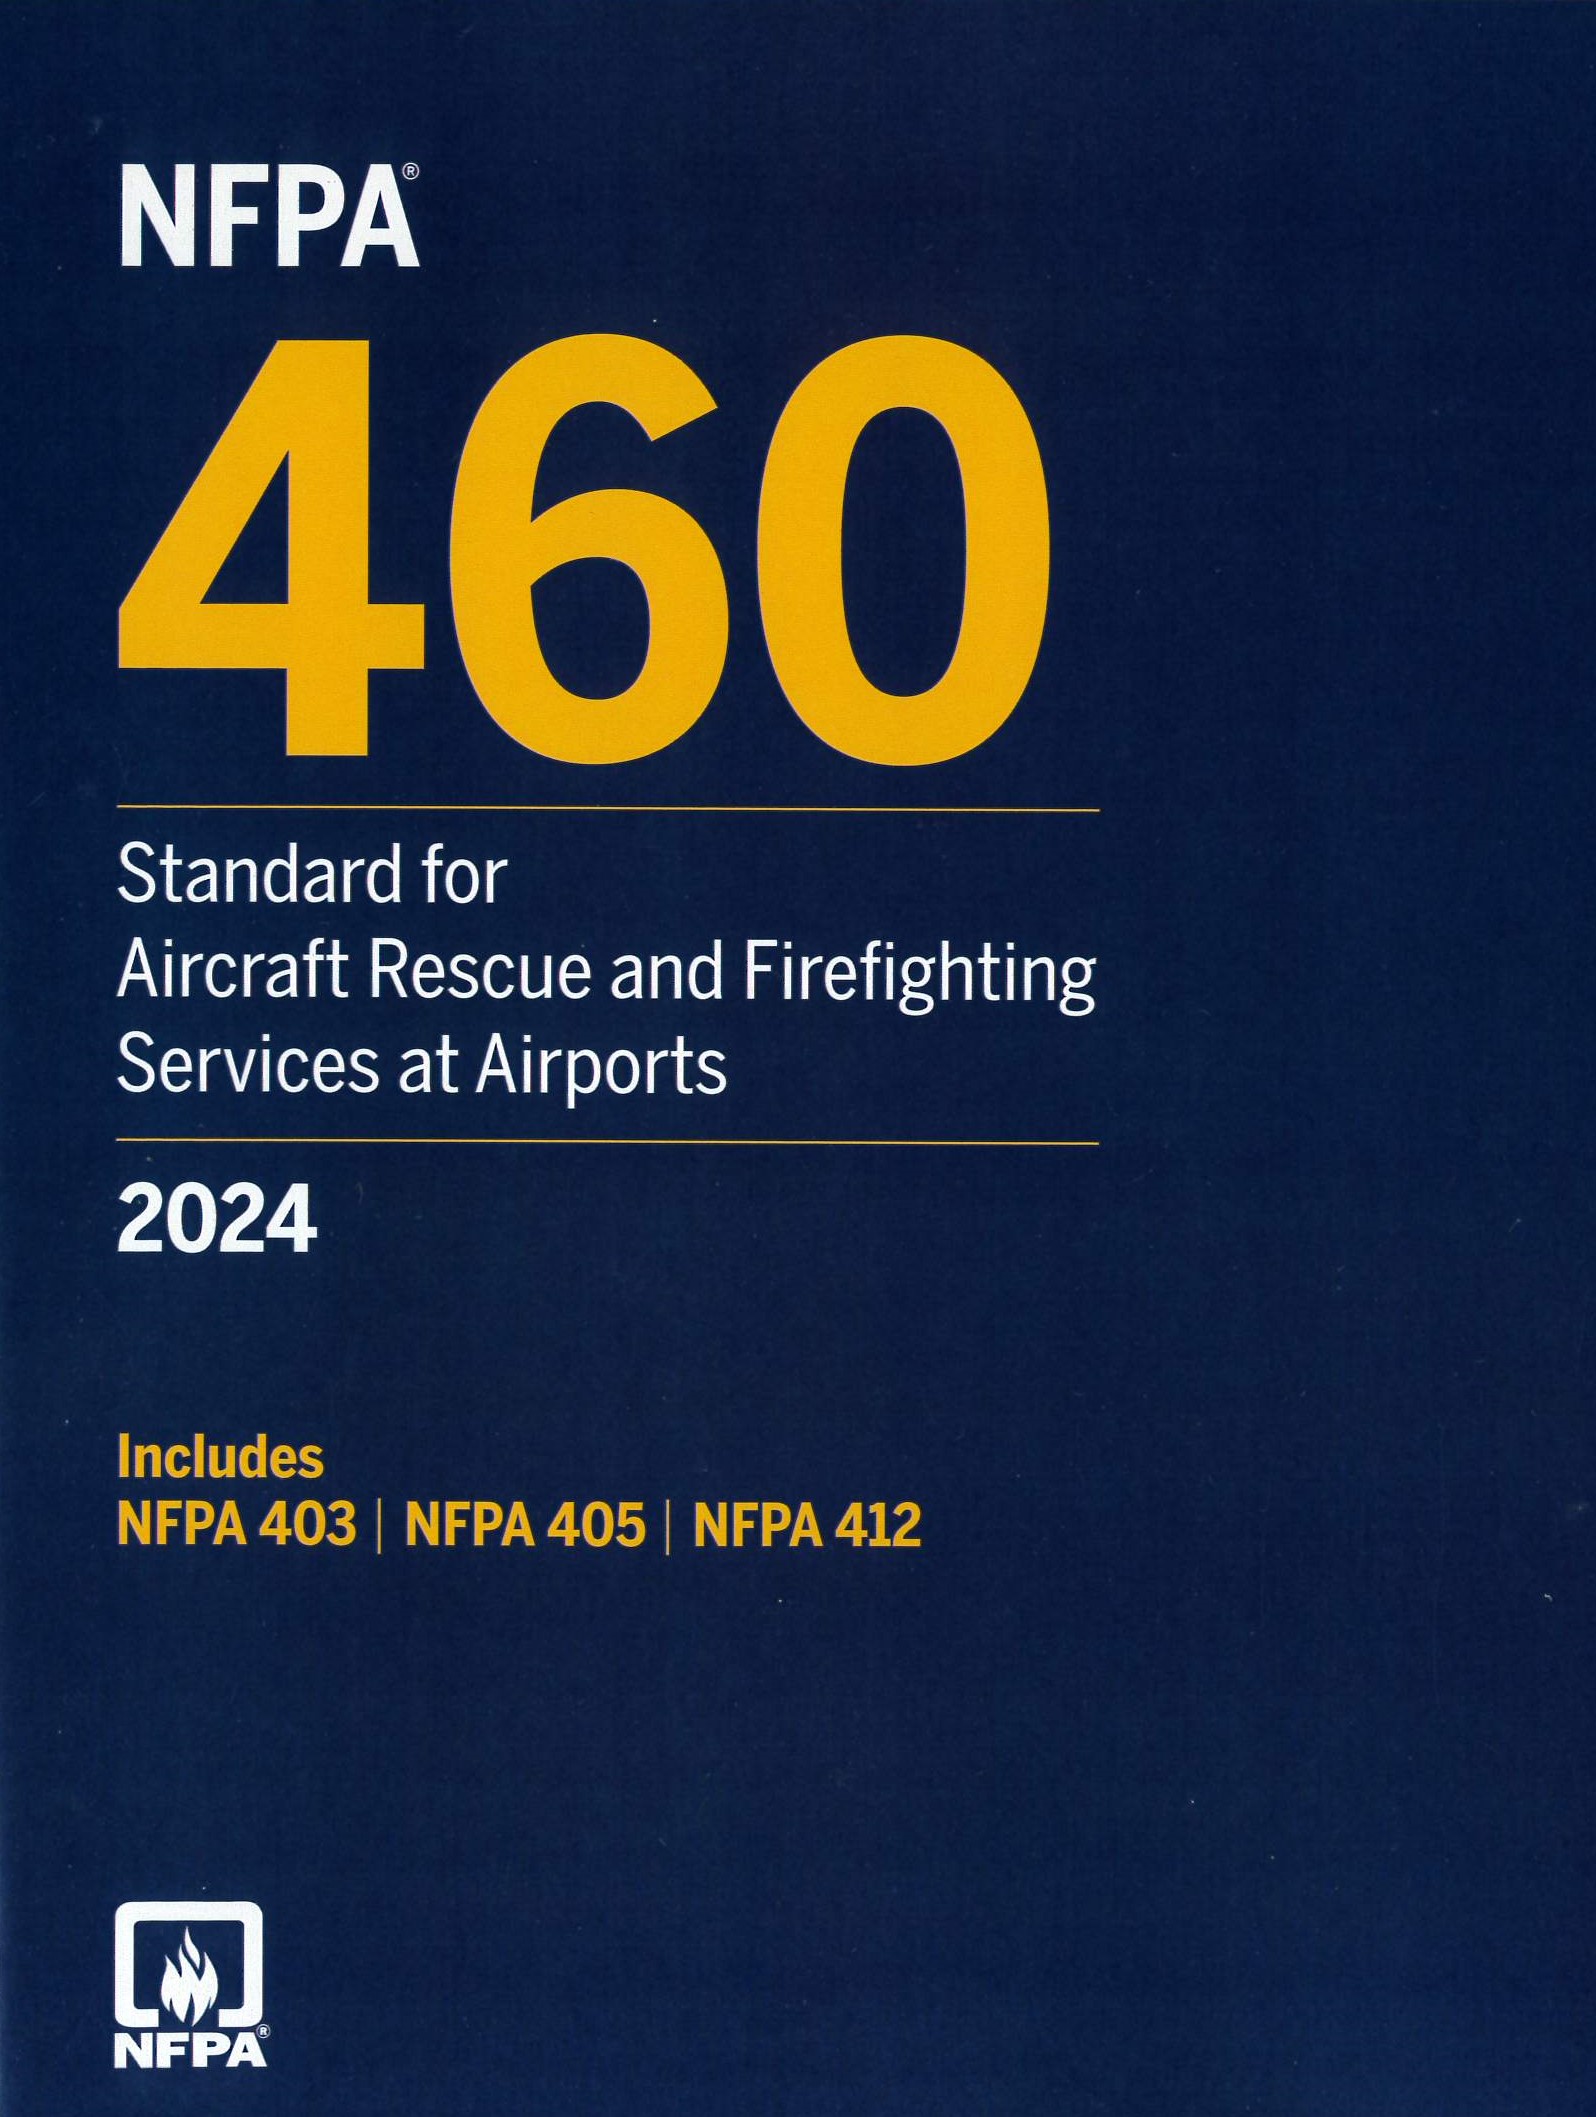 NFPA 460, Standard for Aircraft Rescue and Firefighting Services at